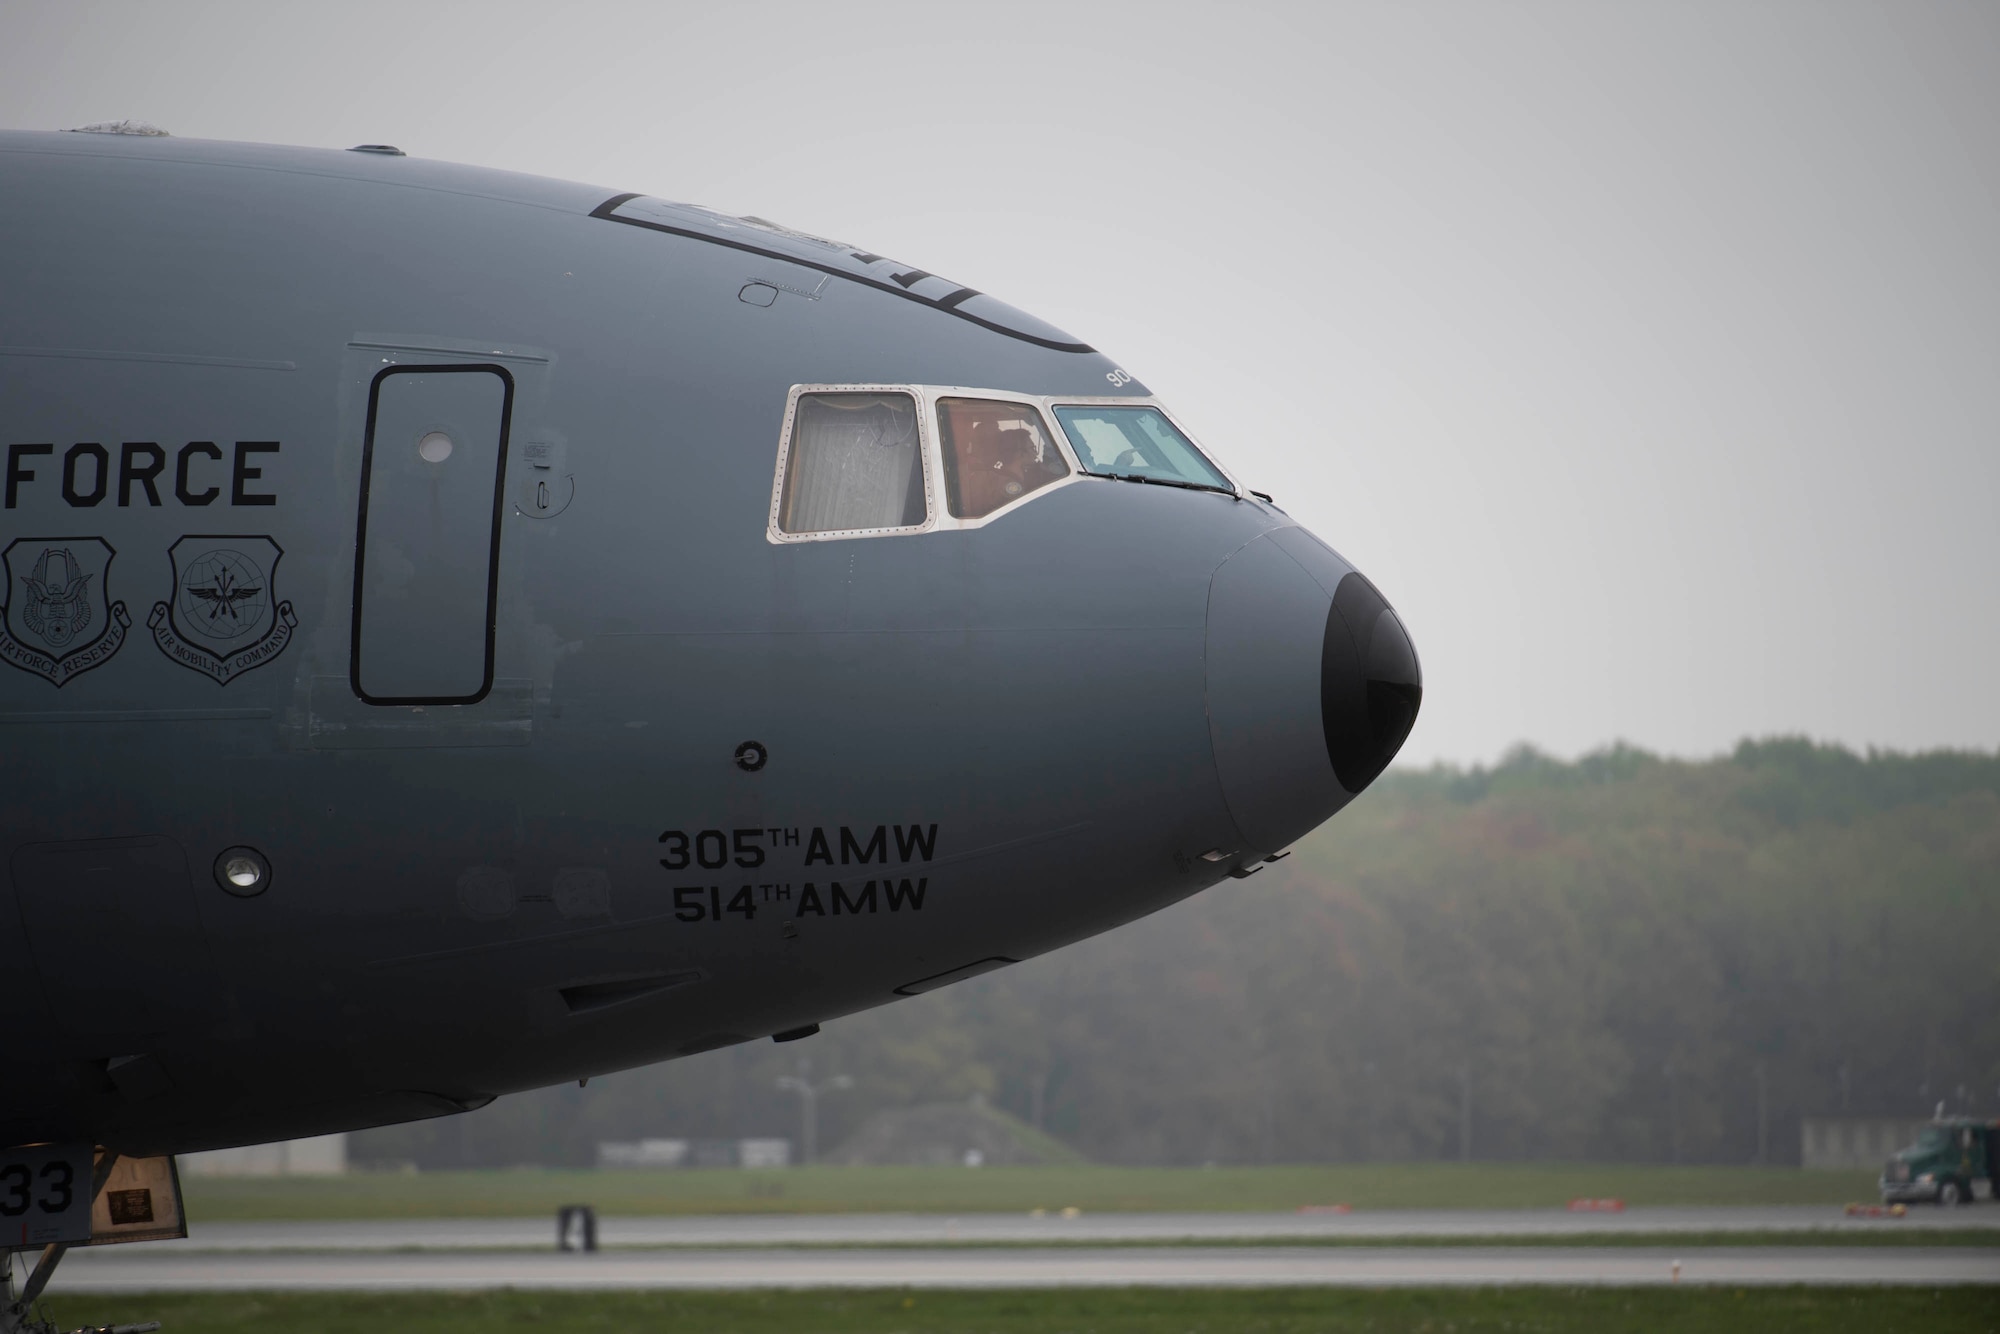 The first KC-10 Extender ever produced arrives at Dover Air Force Base, Delaware, April 26, 2022. The aircraft was officially retired following a short ceremony and will become part of the Air Mobility Command museum. (U.S. Air Force photo by Tech. Sgt. J.D. Strong II)